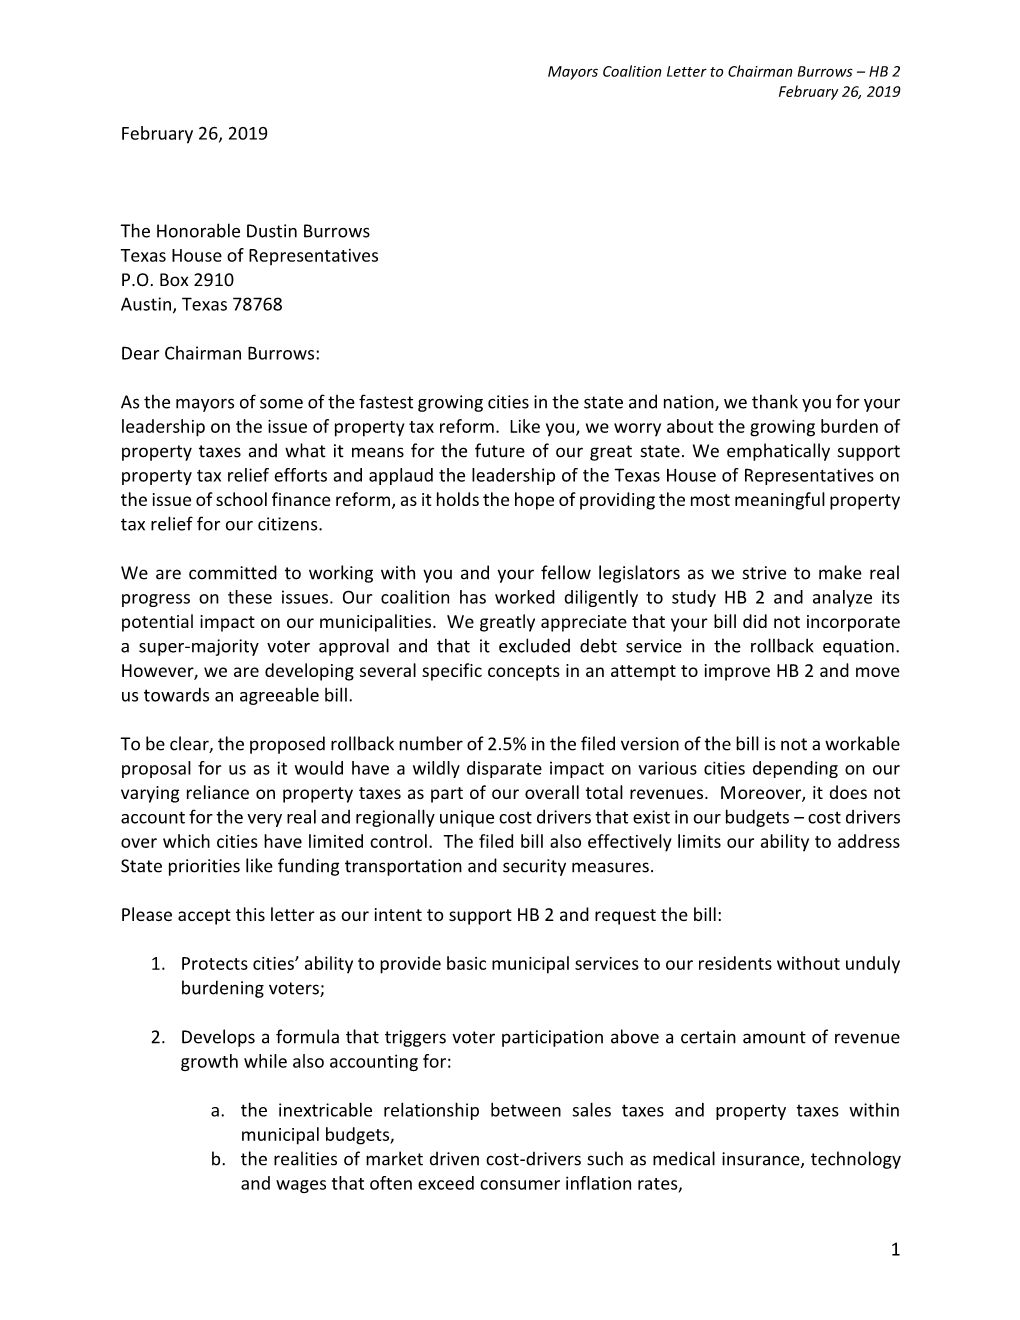 Letter to Chairman Burrows – HB 2 February 26, 2019